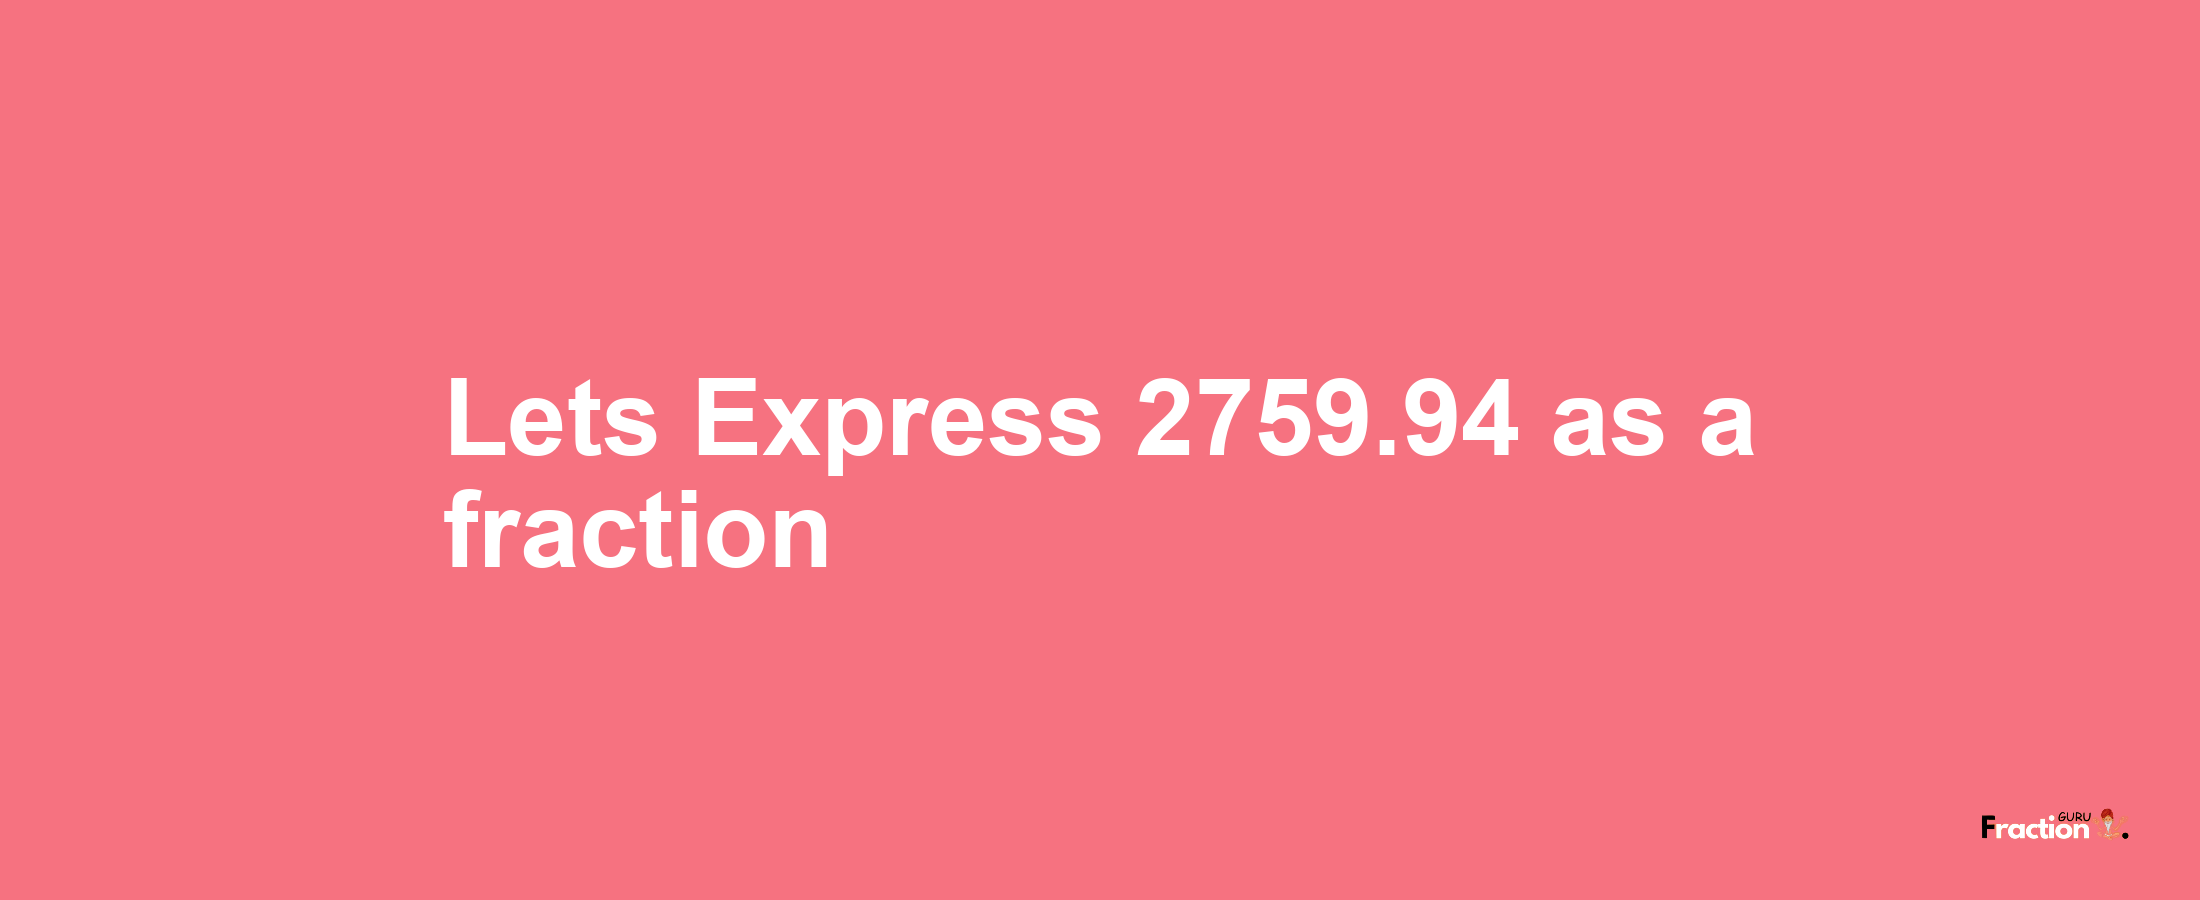 Lets Express 2759.94 as afraction